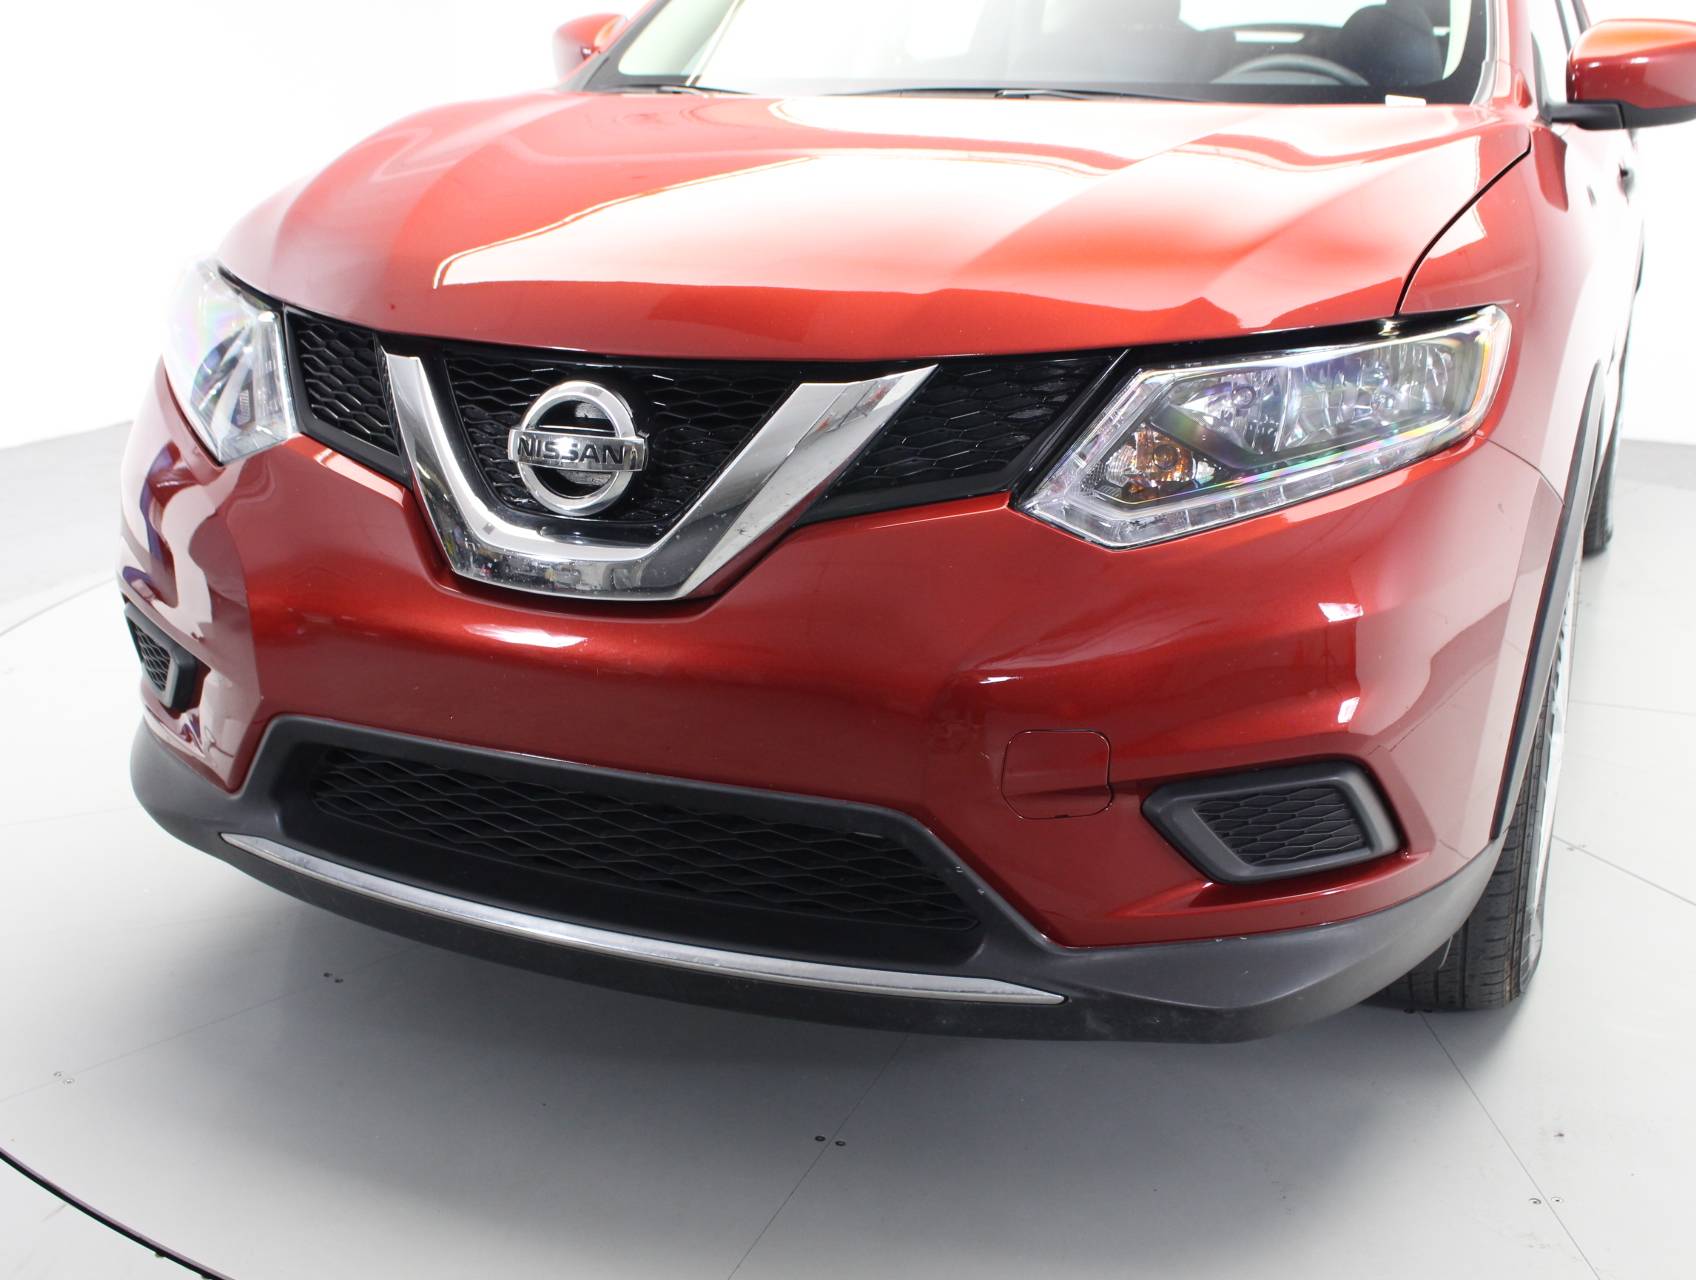 Florida Fine Cars - Used NISSAN ROGUE 2016 WEST PALM S